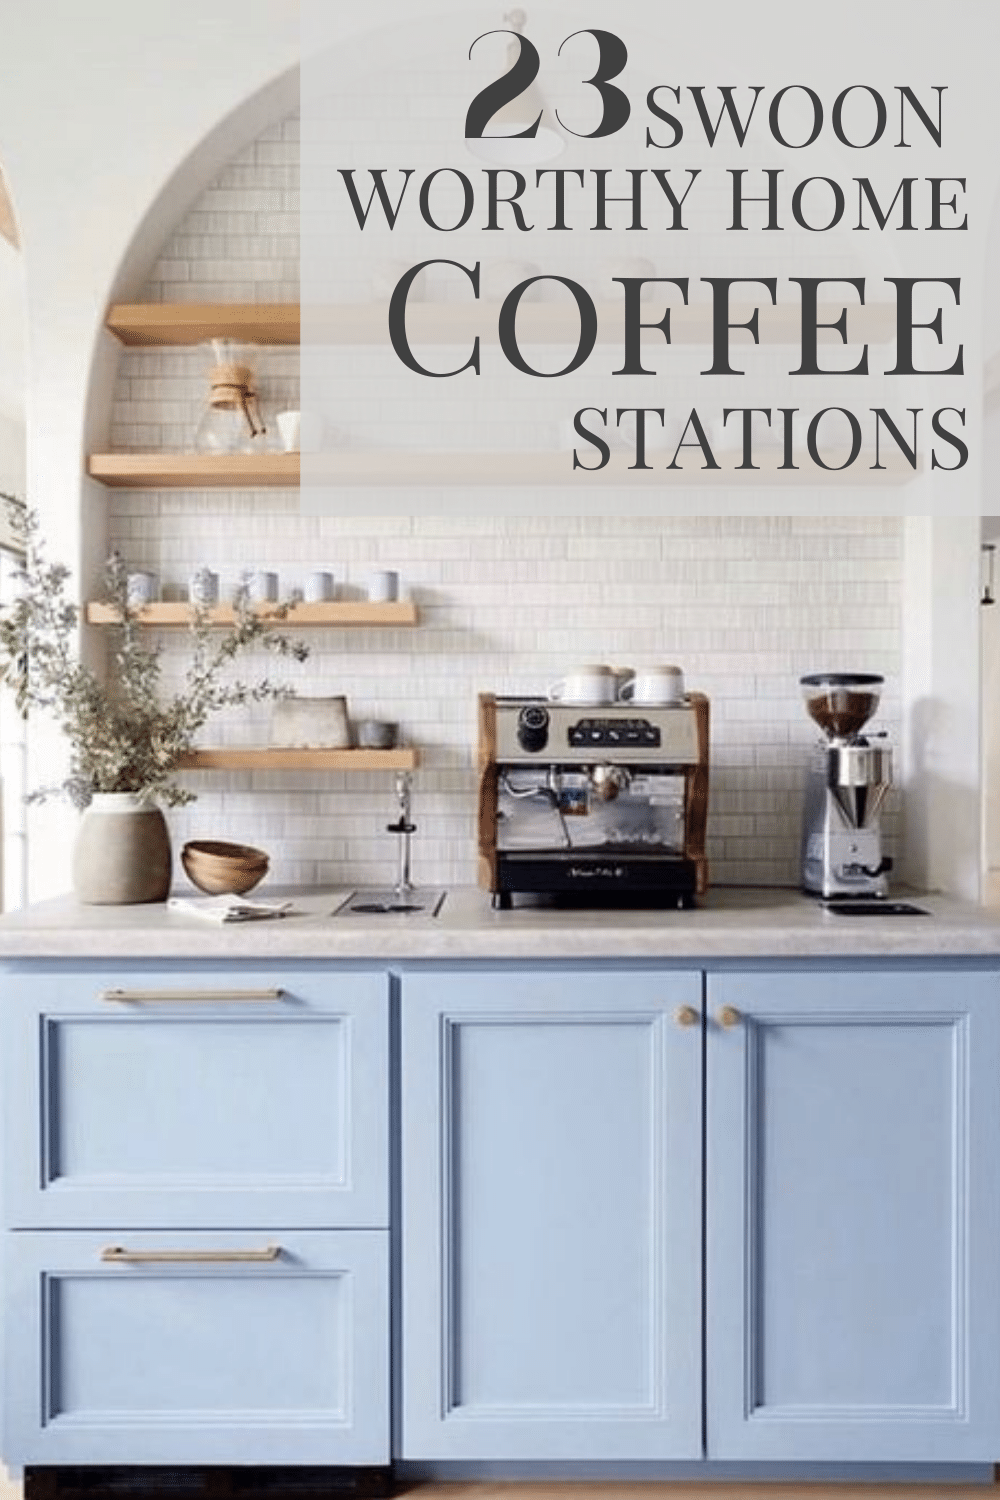 23 Swoon Worthy Coffee Stations